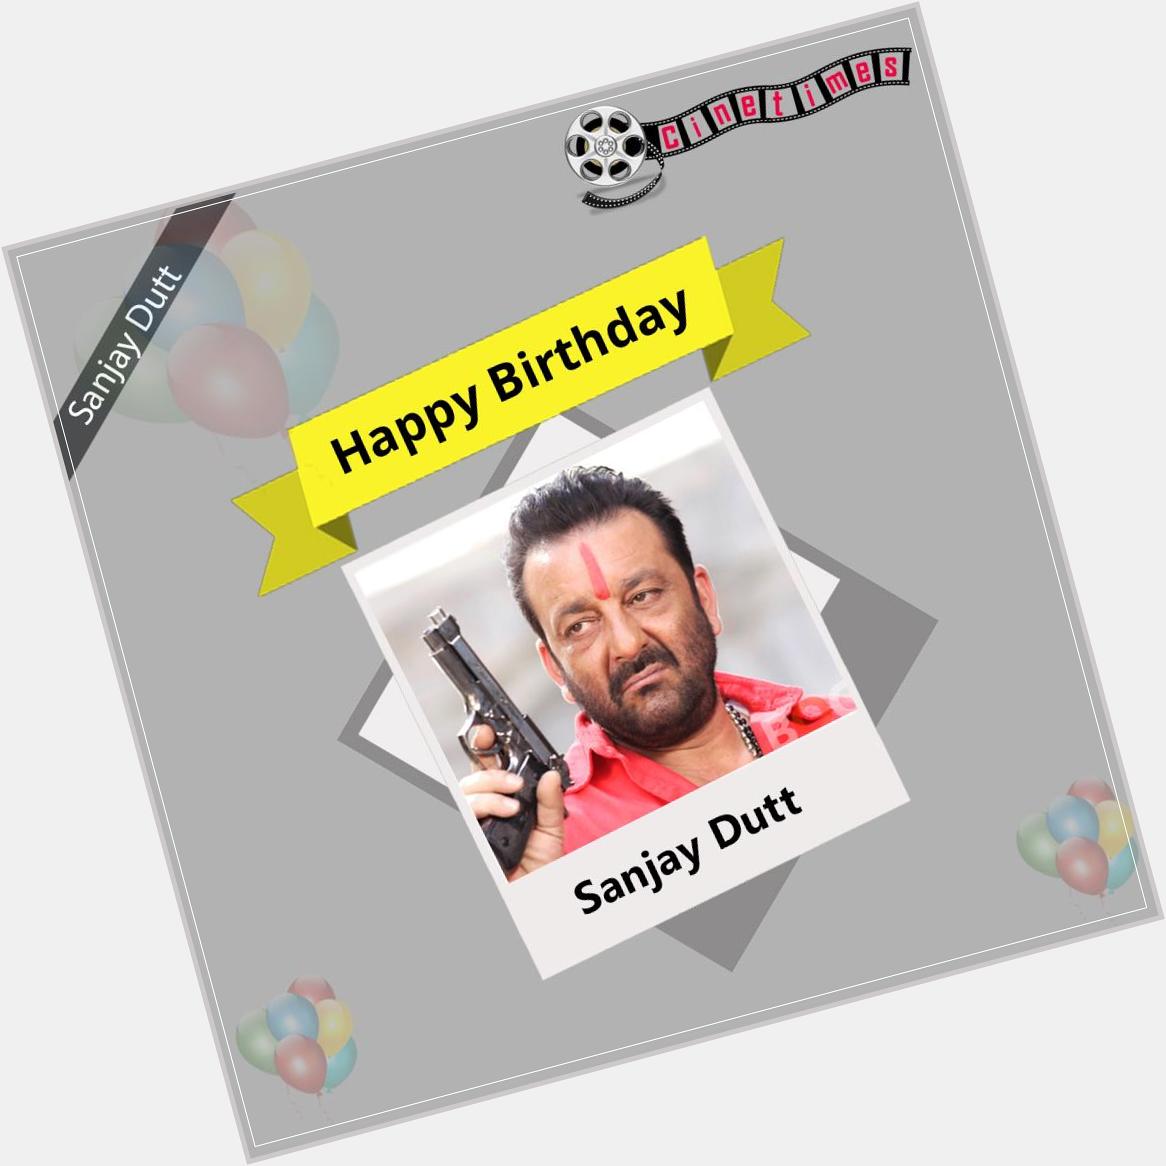 Join us in Wishing Actor Sanjay Dutt A Very Happy Birthday 